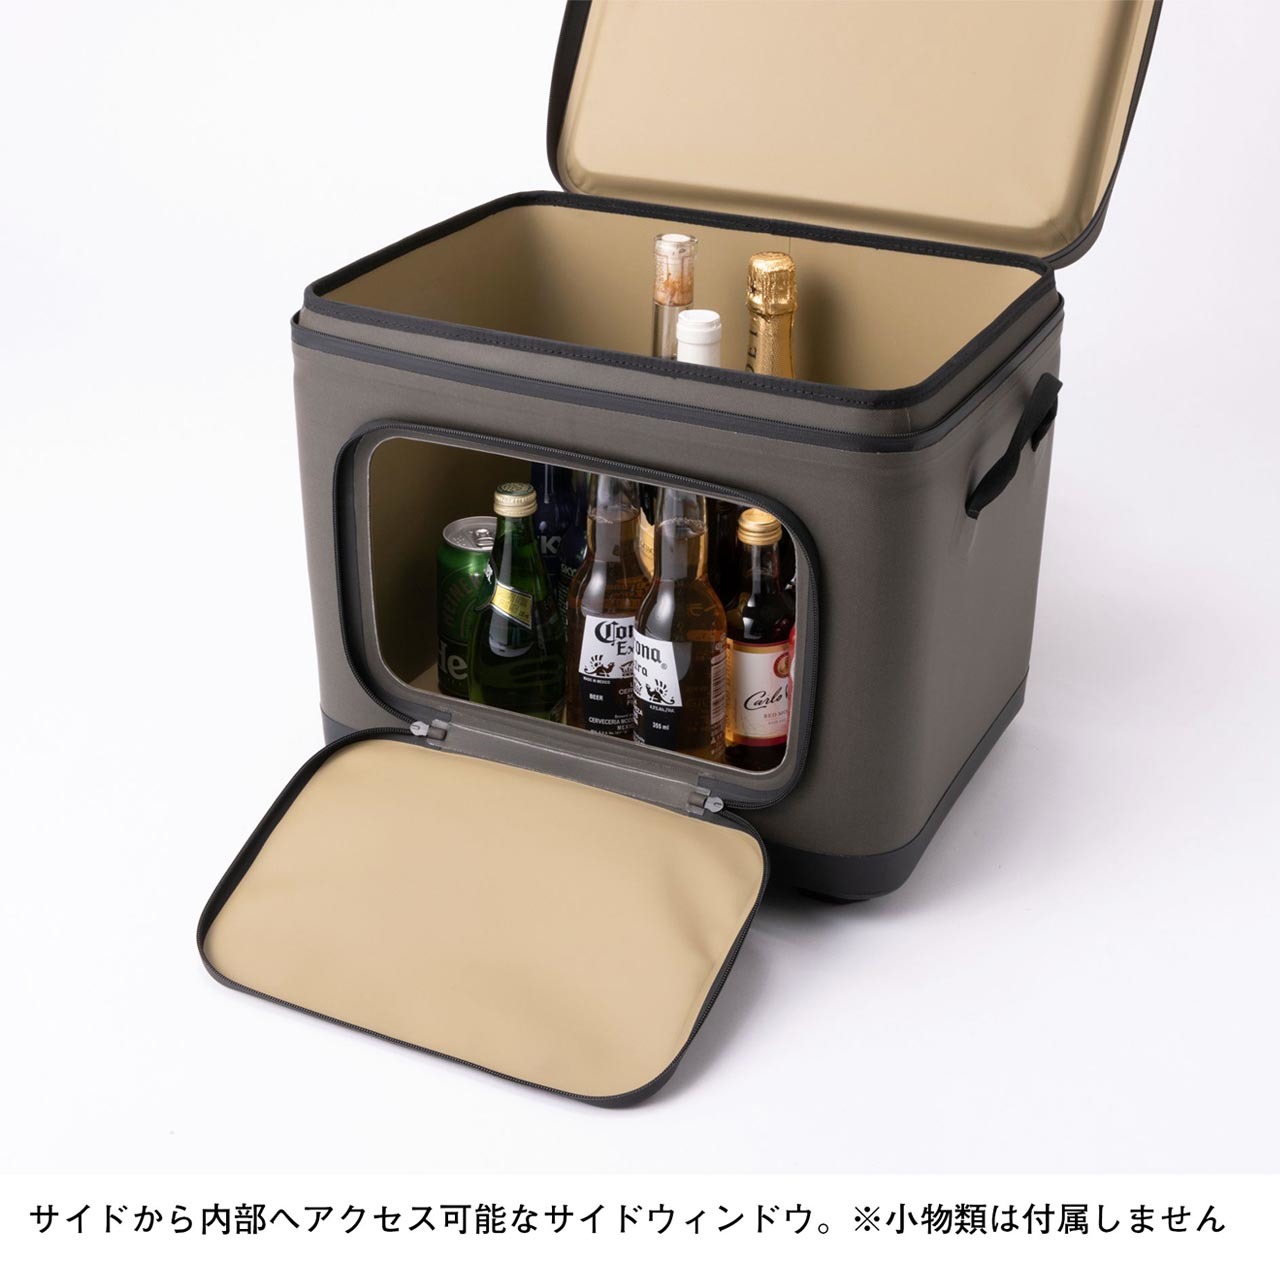 THE NORTH FACE [ザ・ノース・フェイス] Fieludens Gear Container [NM82235]_f0051306_06005932.jpg